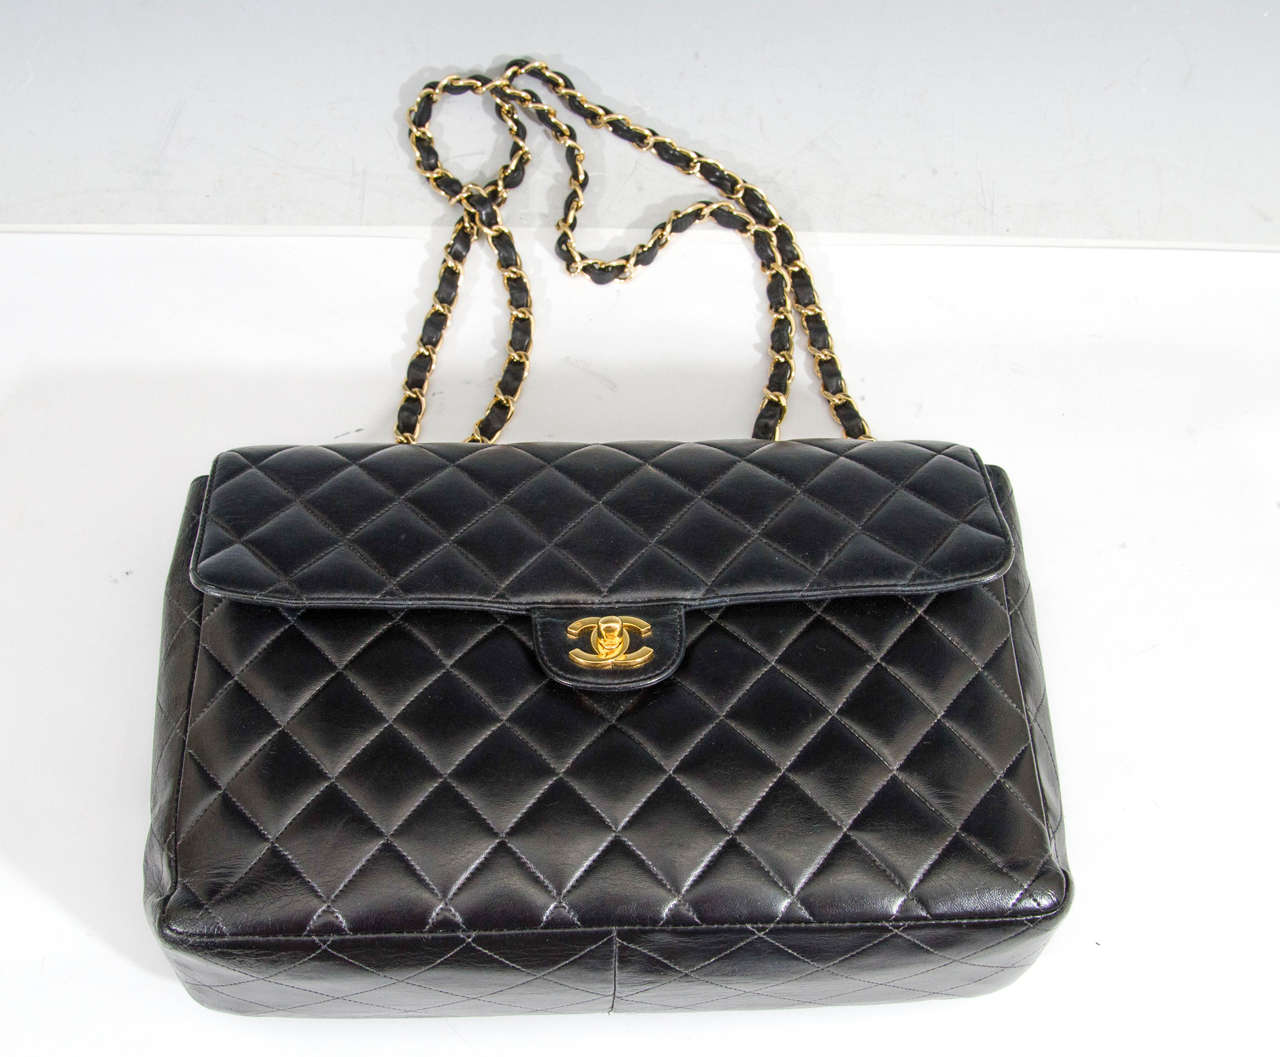 Cert. Authentic CHANEL Black Quilted Lambskin Maxi Classic Flap handbag with gold tone hardware. Authentication number, 5840064, permanently located inside of bag on CHANEL hologram label. Good vintage condition with age appropriate wear.

Item